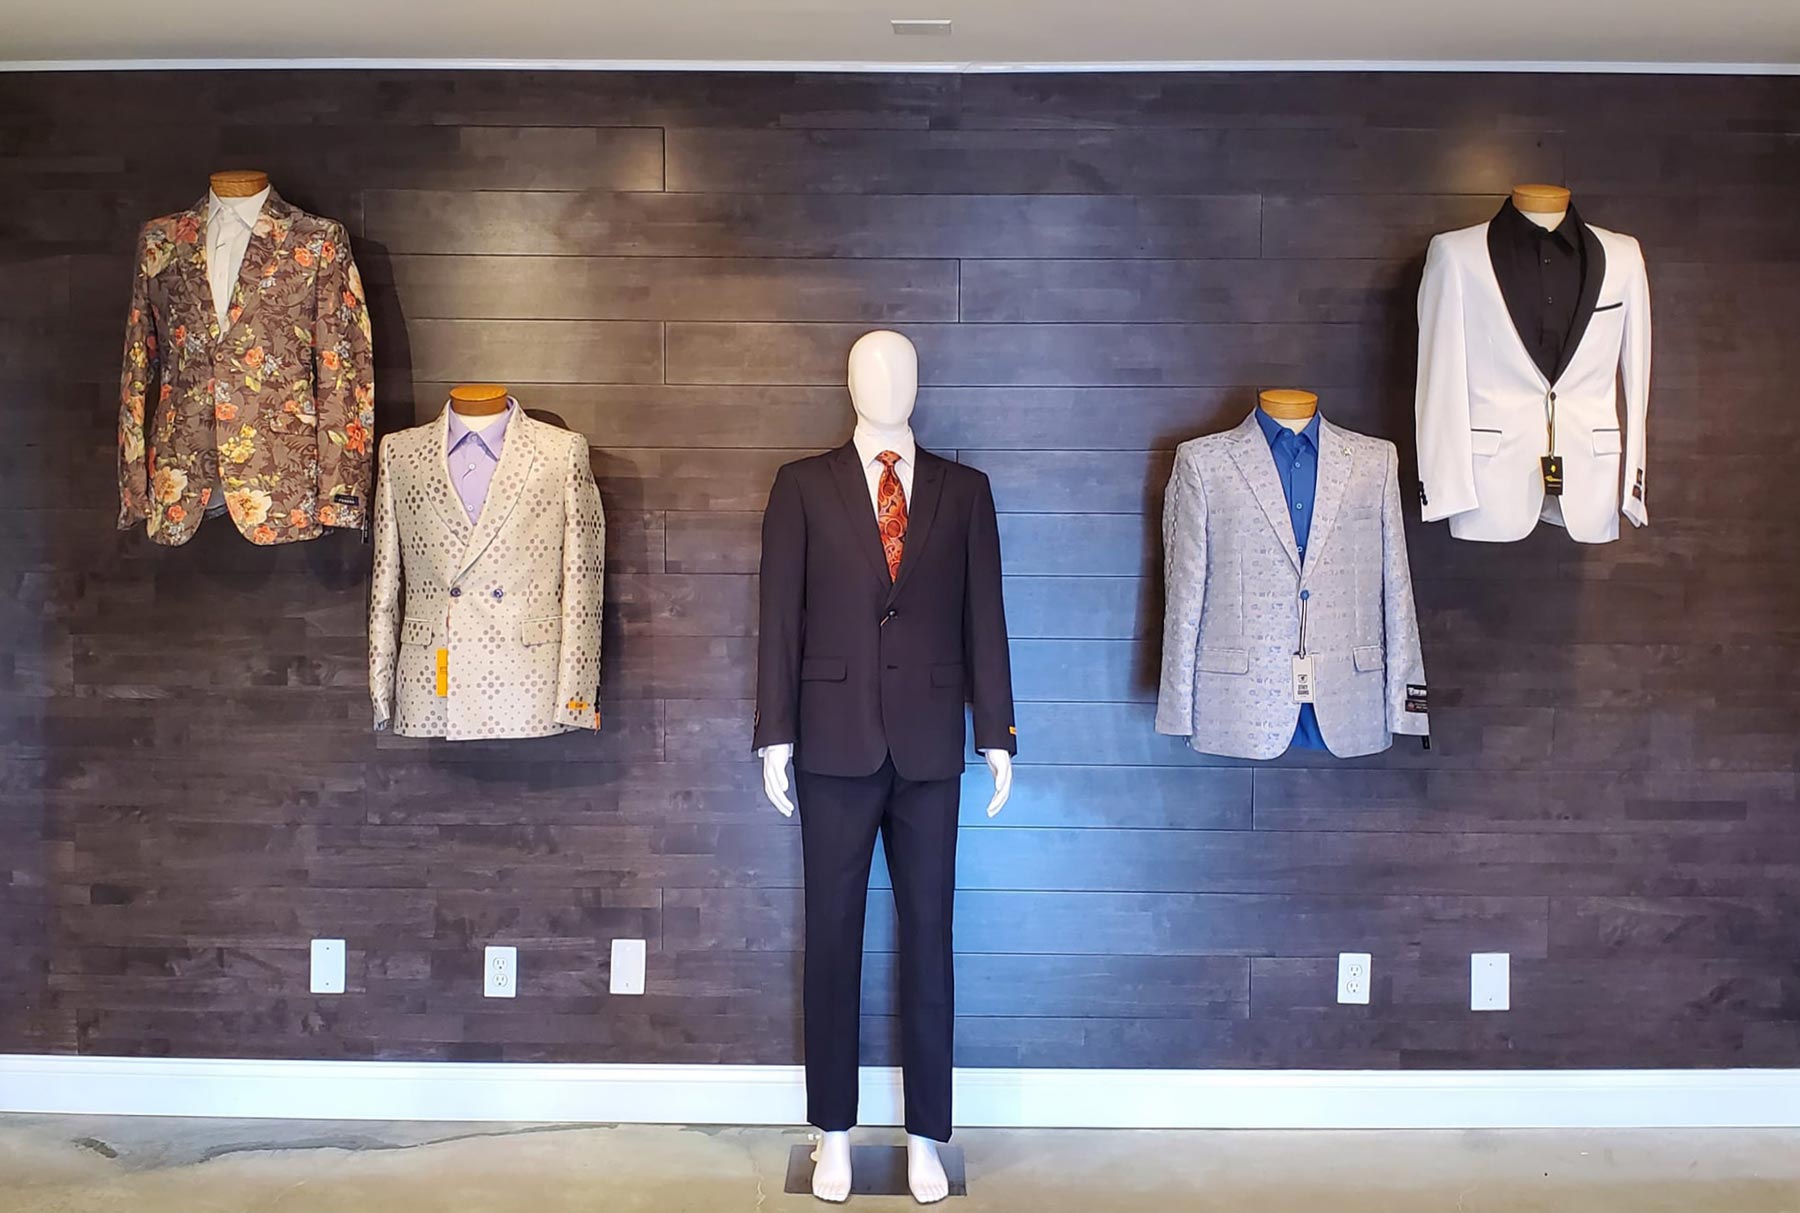 display of suits with mannequin